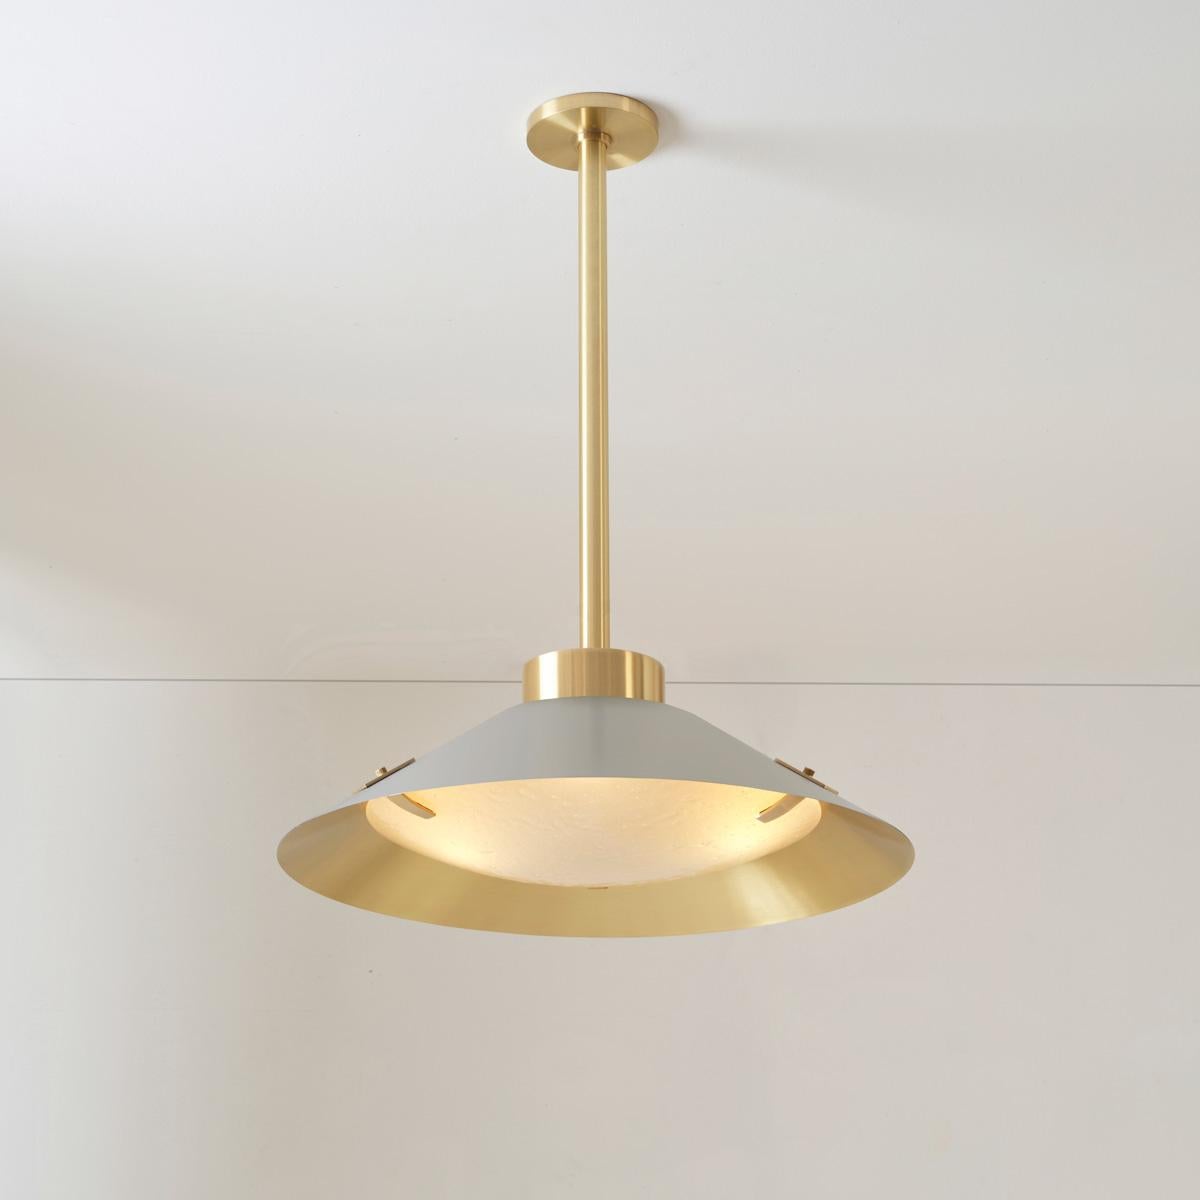 Kono Pendant by Gaspare Asaro. Satin Brass and Bronze In New Condition For Sale In New York, NY